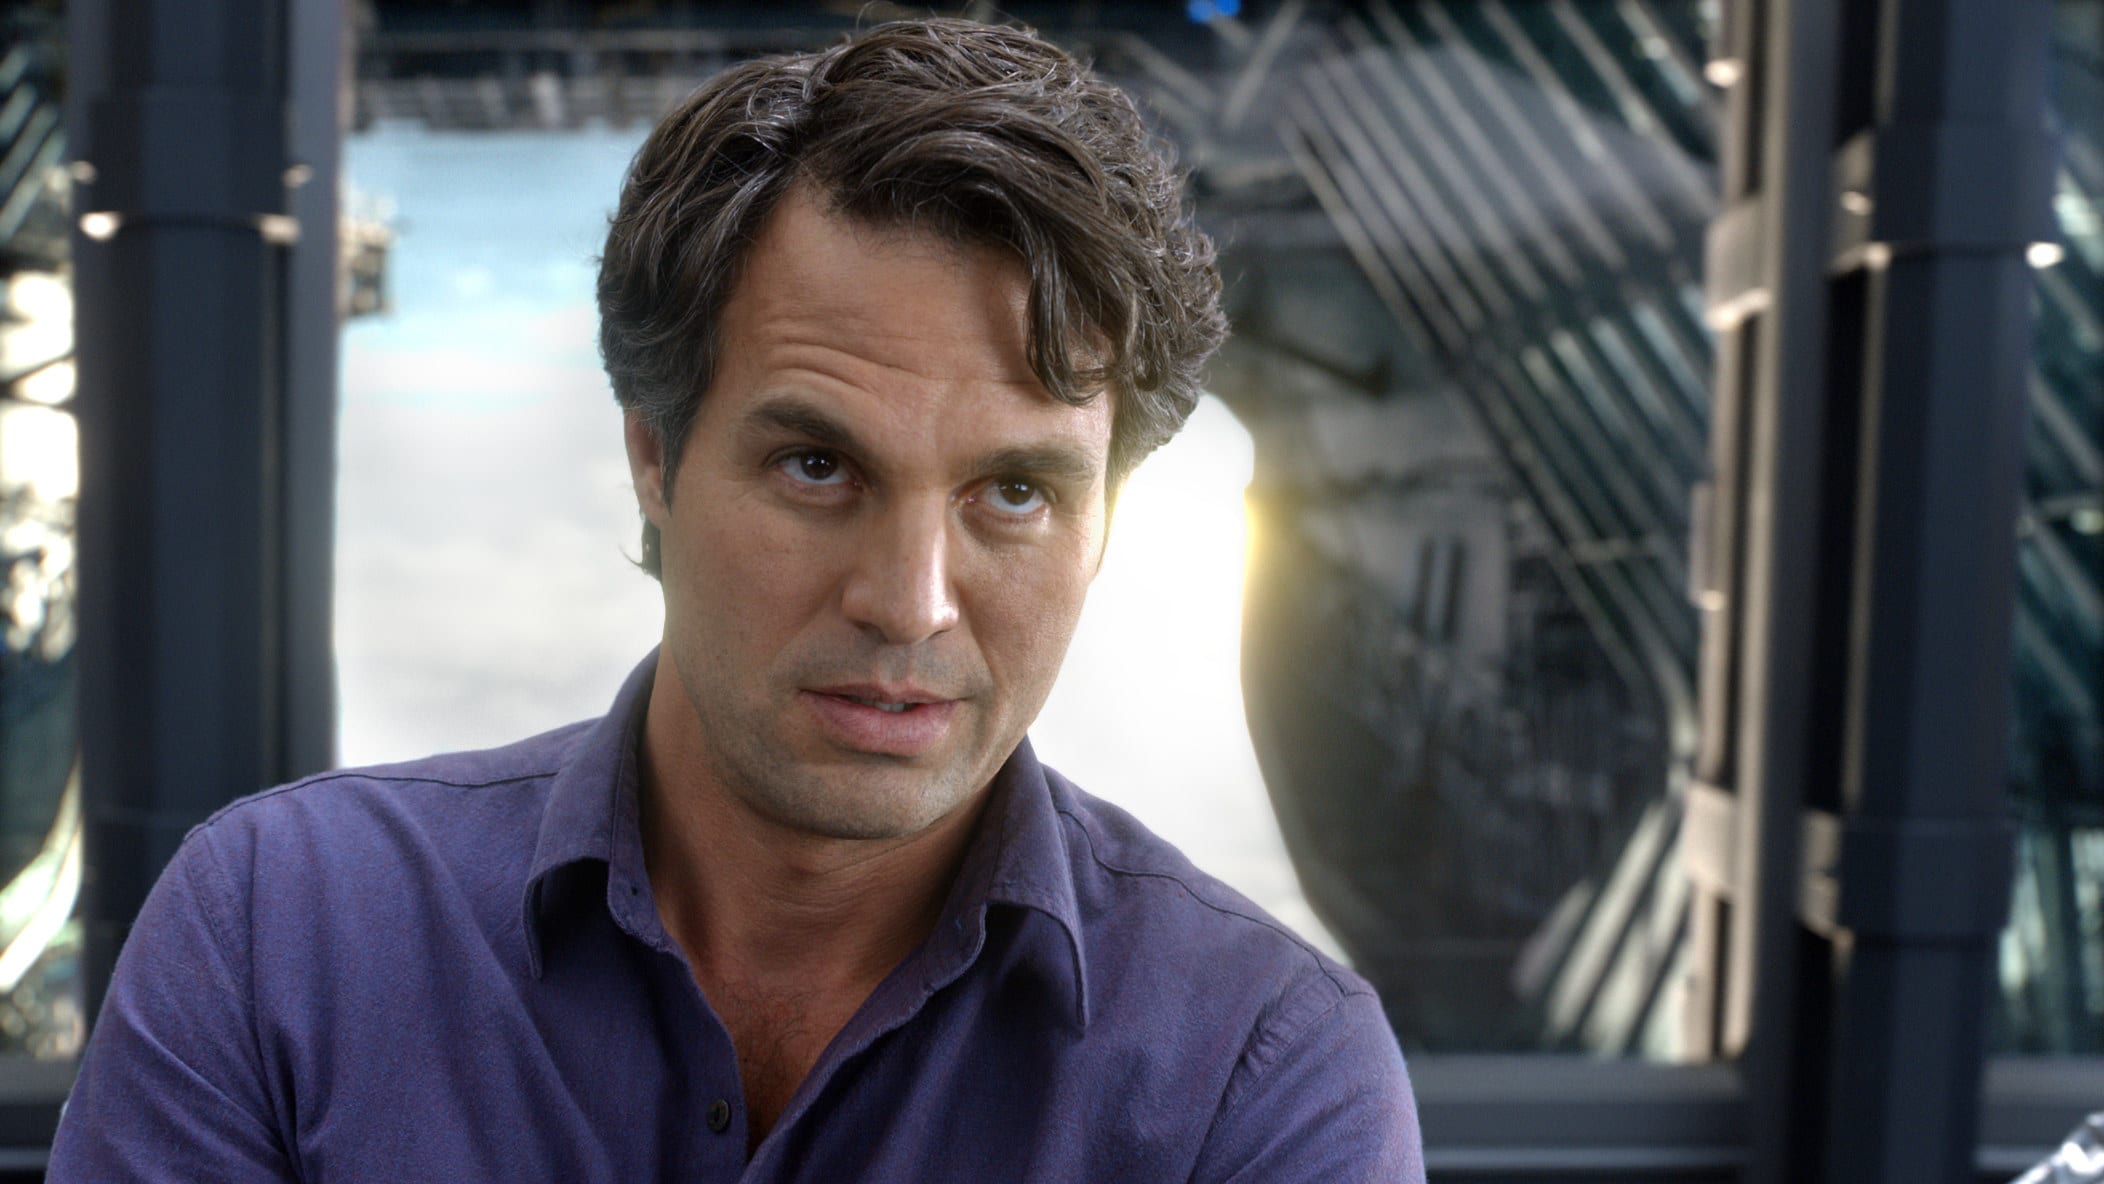 on the helicarrier, Bruce talks with his new teammates